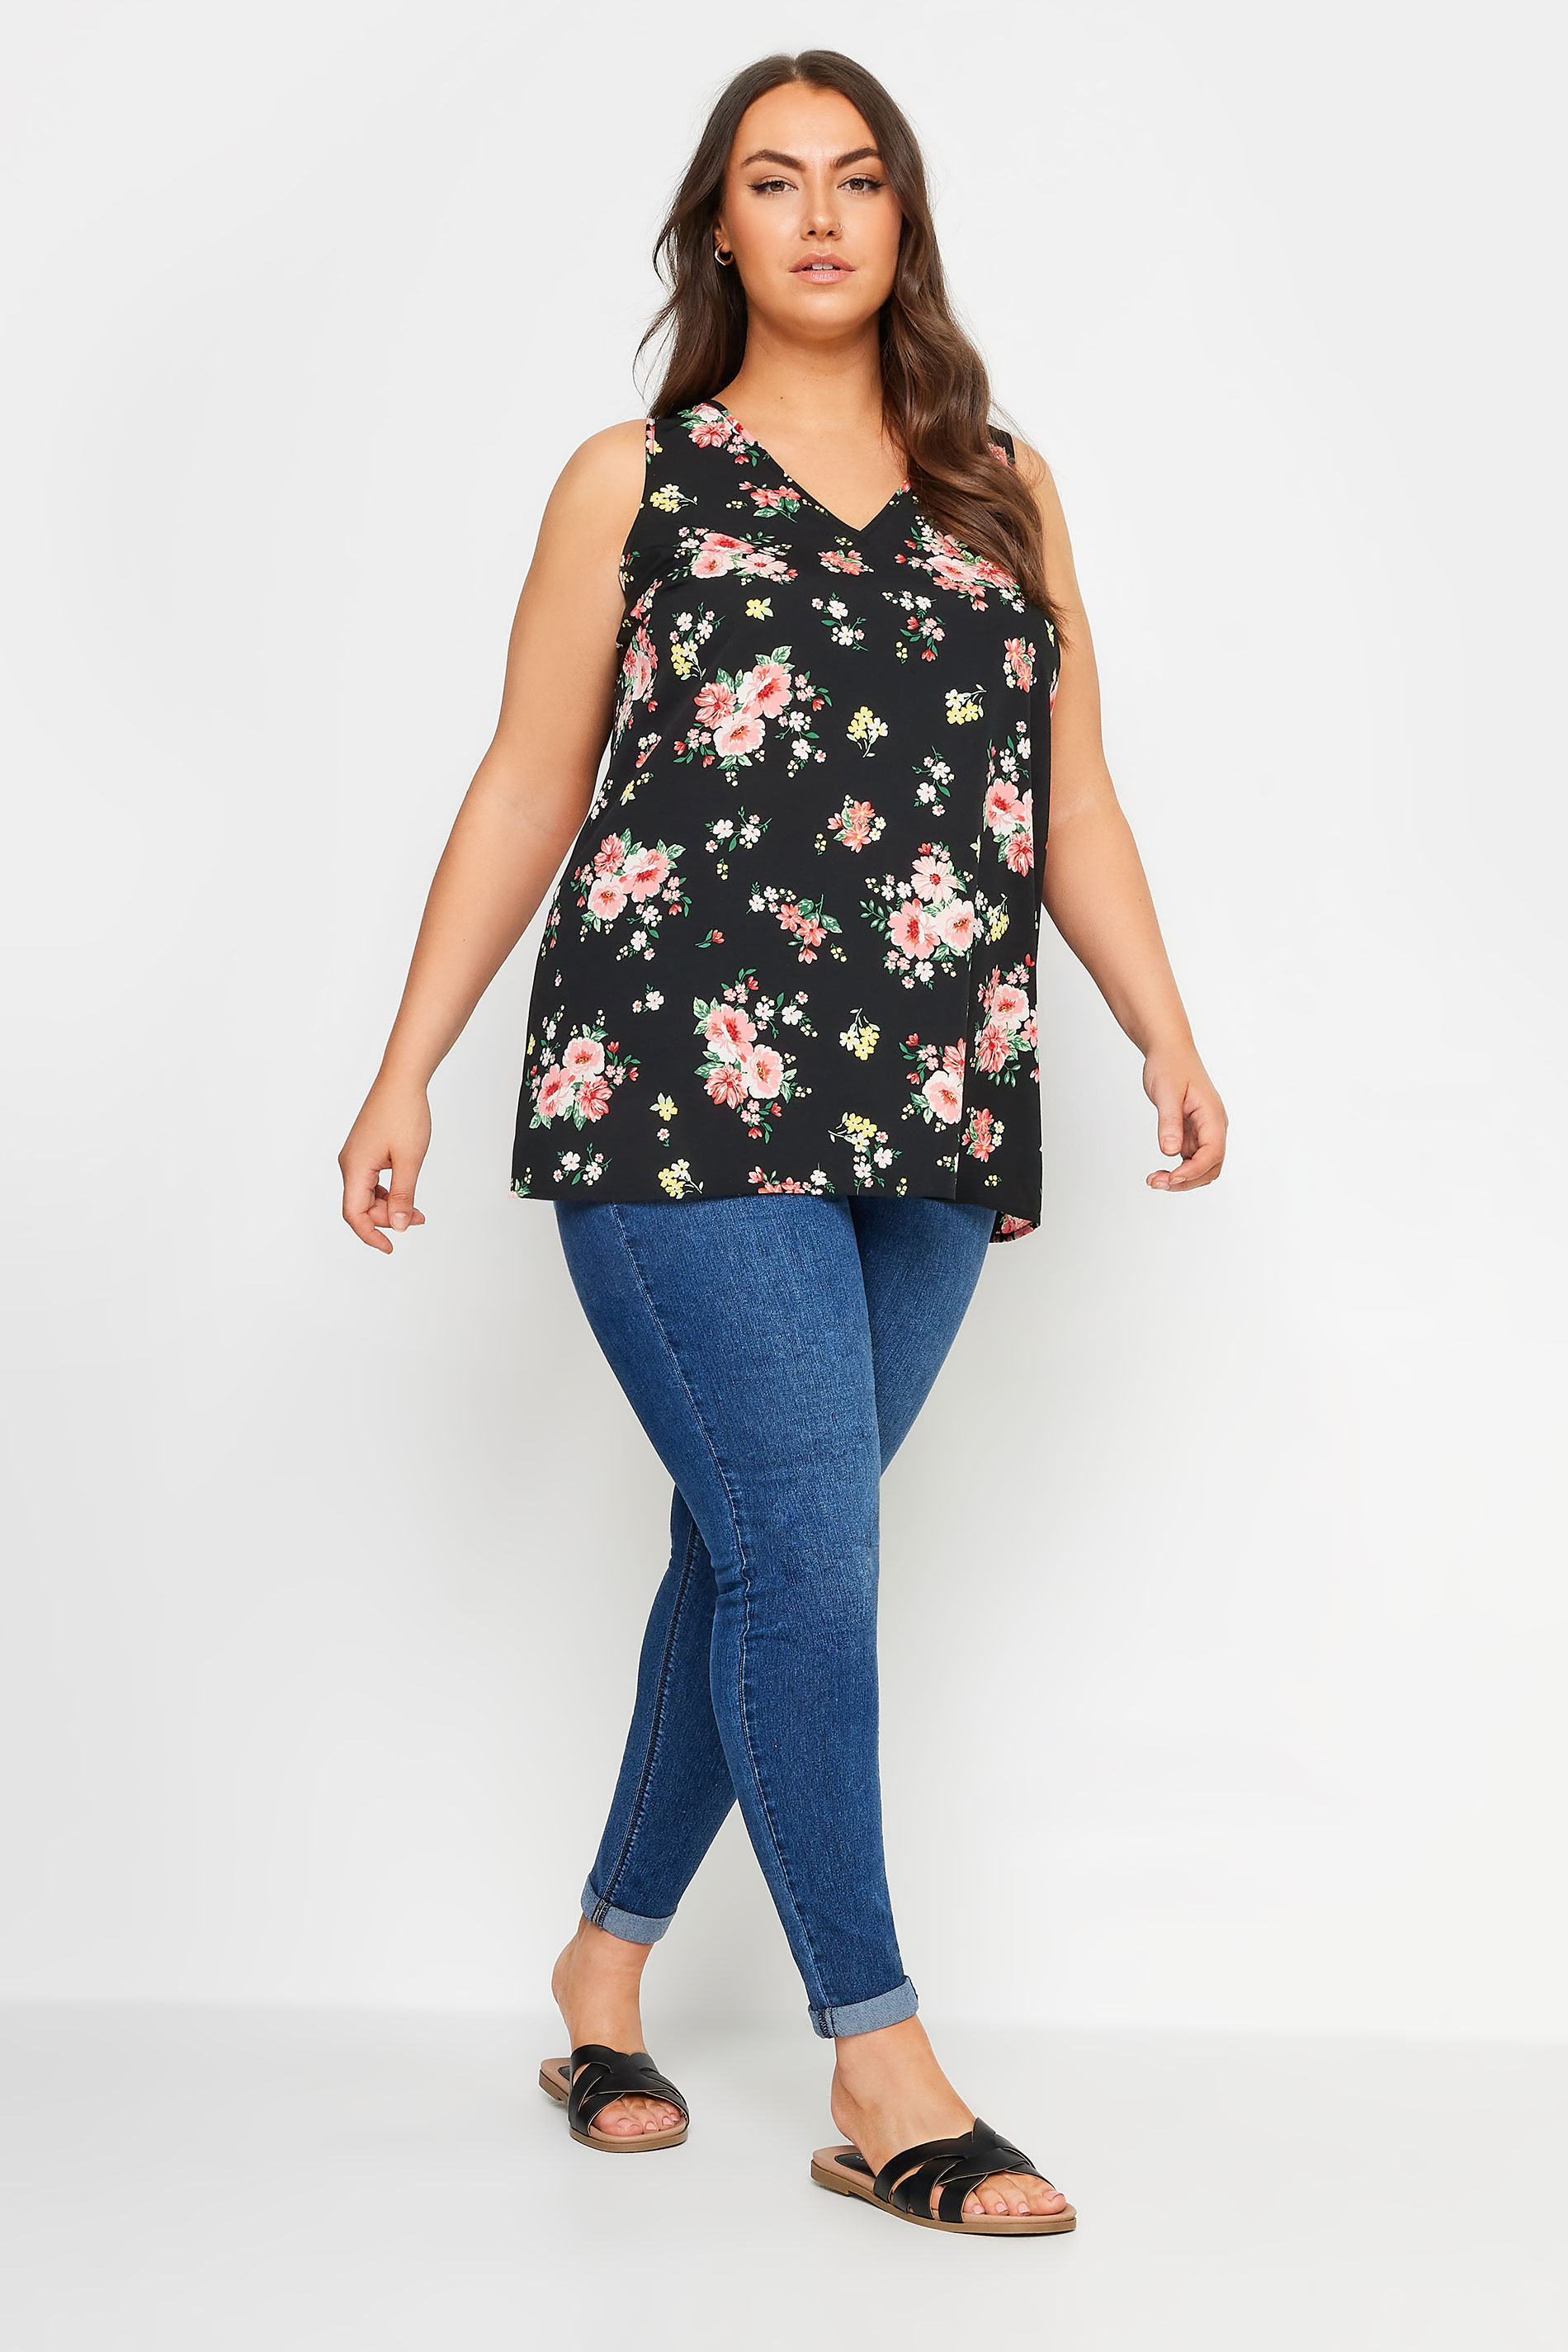 YOURS Plus Size Black & Pink Floral Print Vest Top | Yours Clothing 3